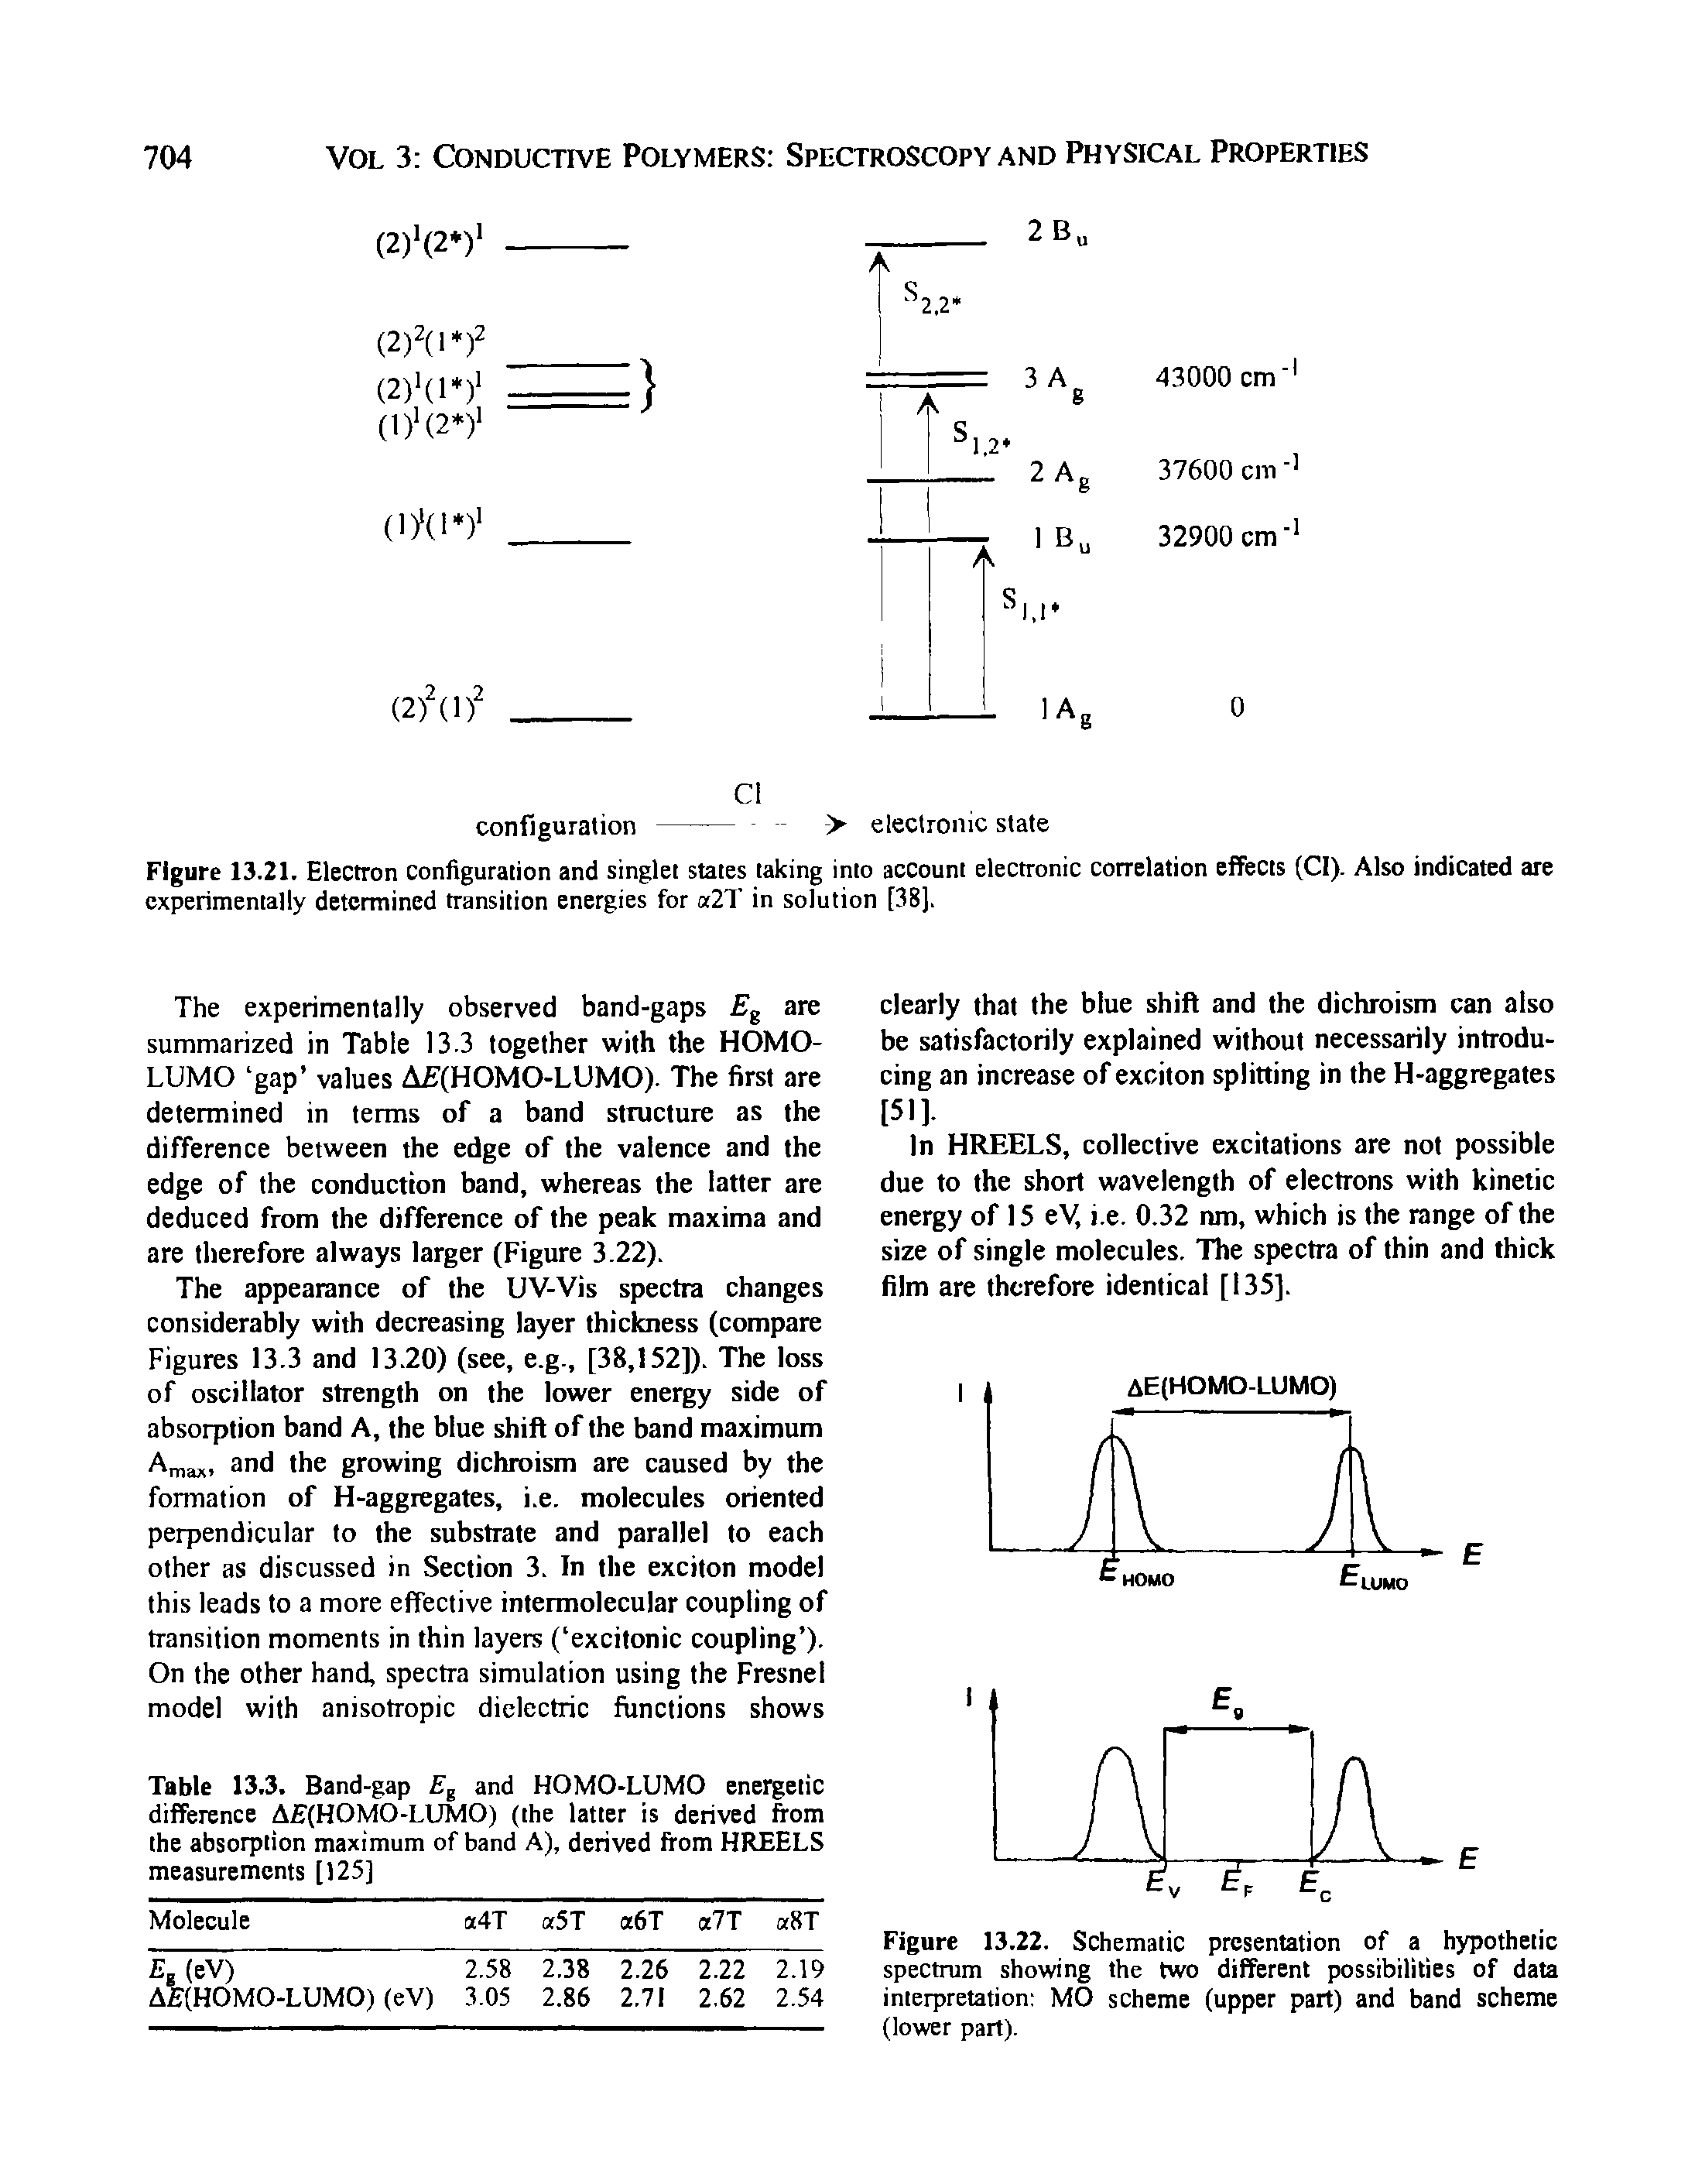 Figure 13.21. Electron configuration and singlet stales taking into account electronic correlation effects (Cl). Also indicated are experimentally determined transition energies for a2T in solution [38],...